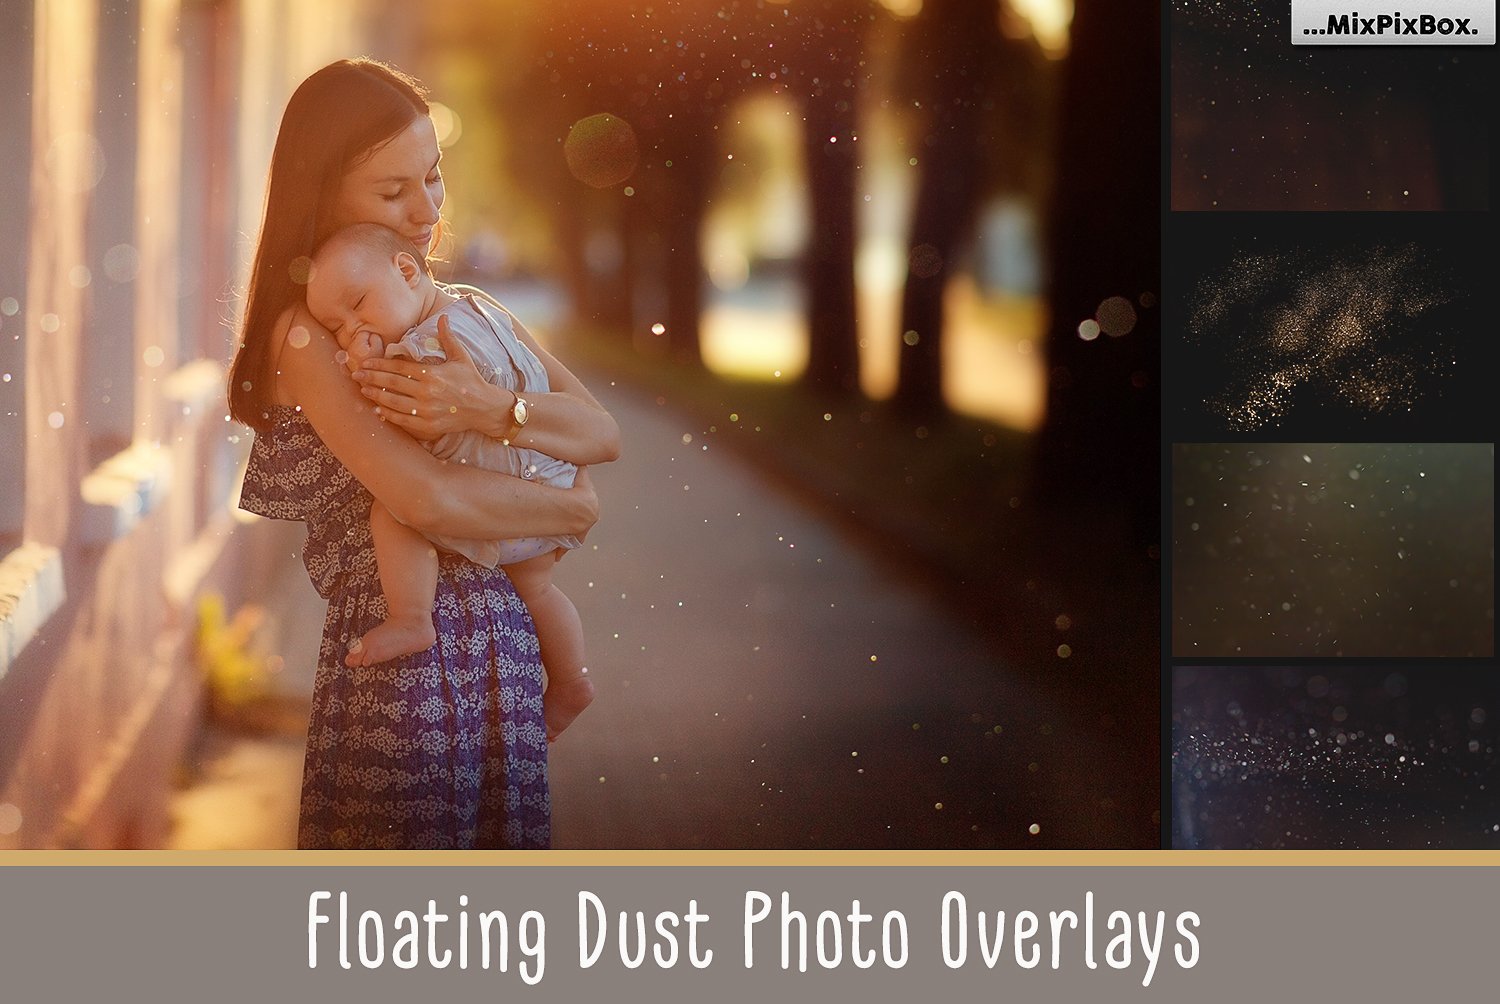 75 Floating Dust Photo Overlayscover image.